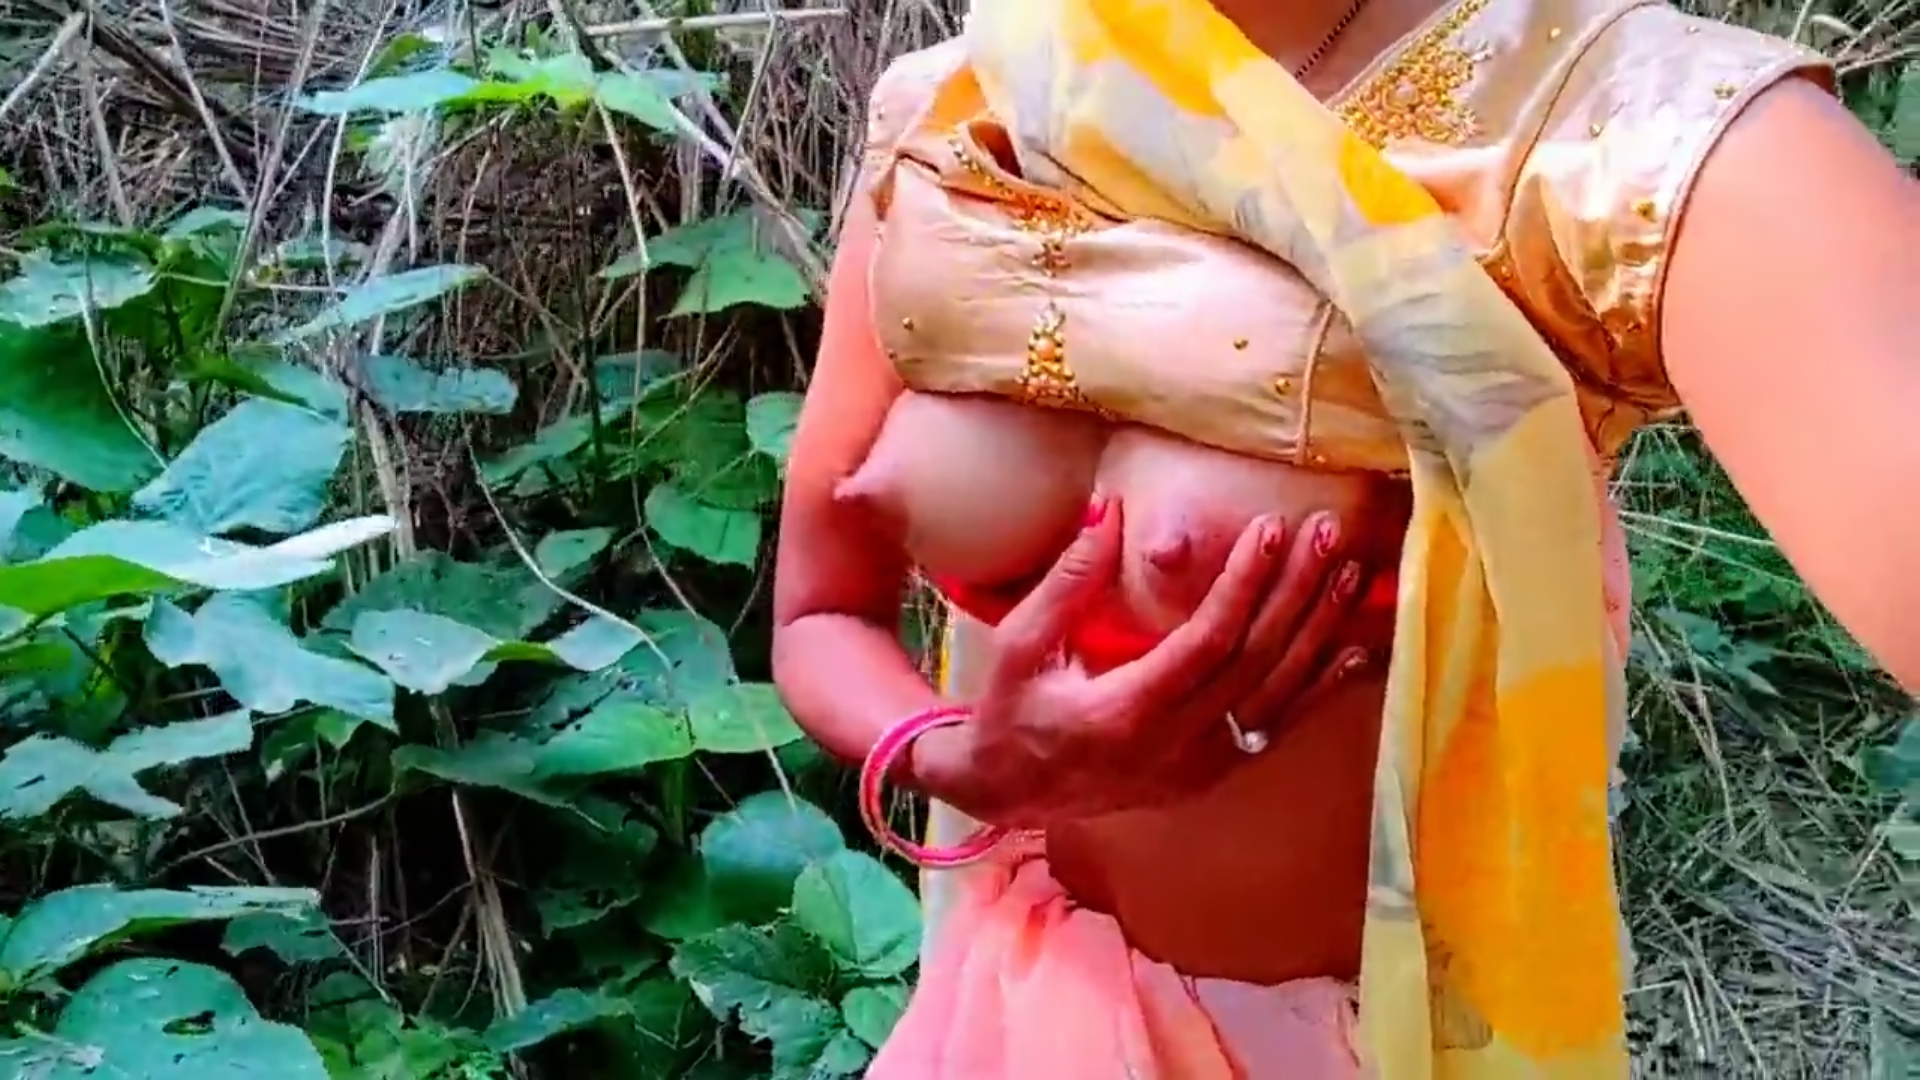 Aunty Hot Nude Xxxx - Sexy Desi aunt showing her nude tits and body in jungle, Indian XXX sex |  AREA51.PORN